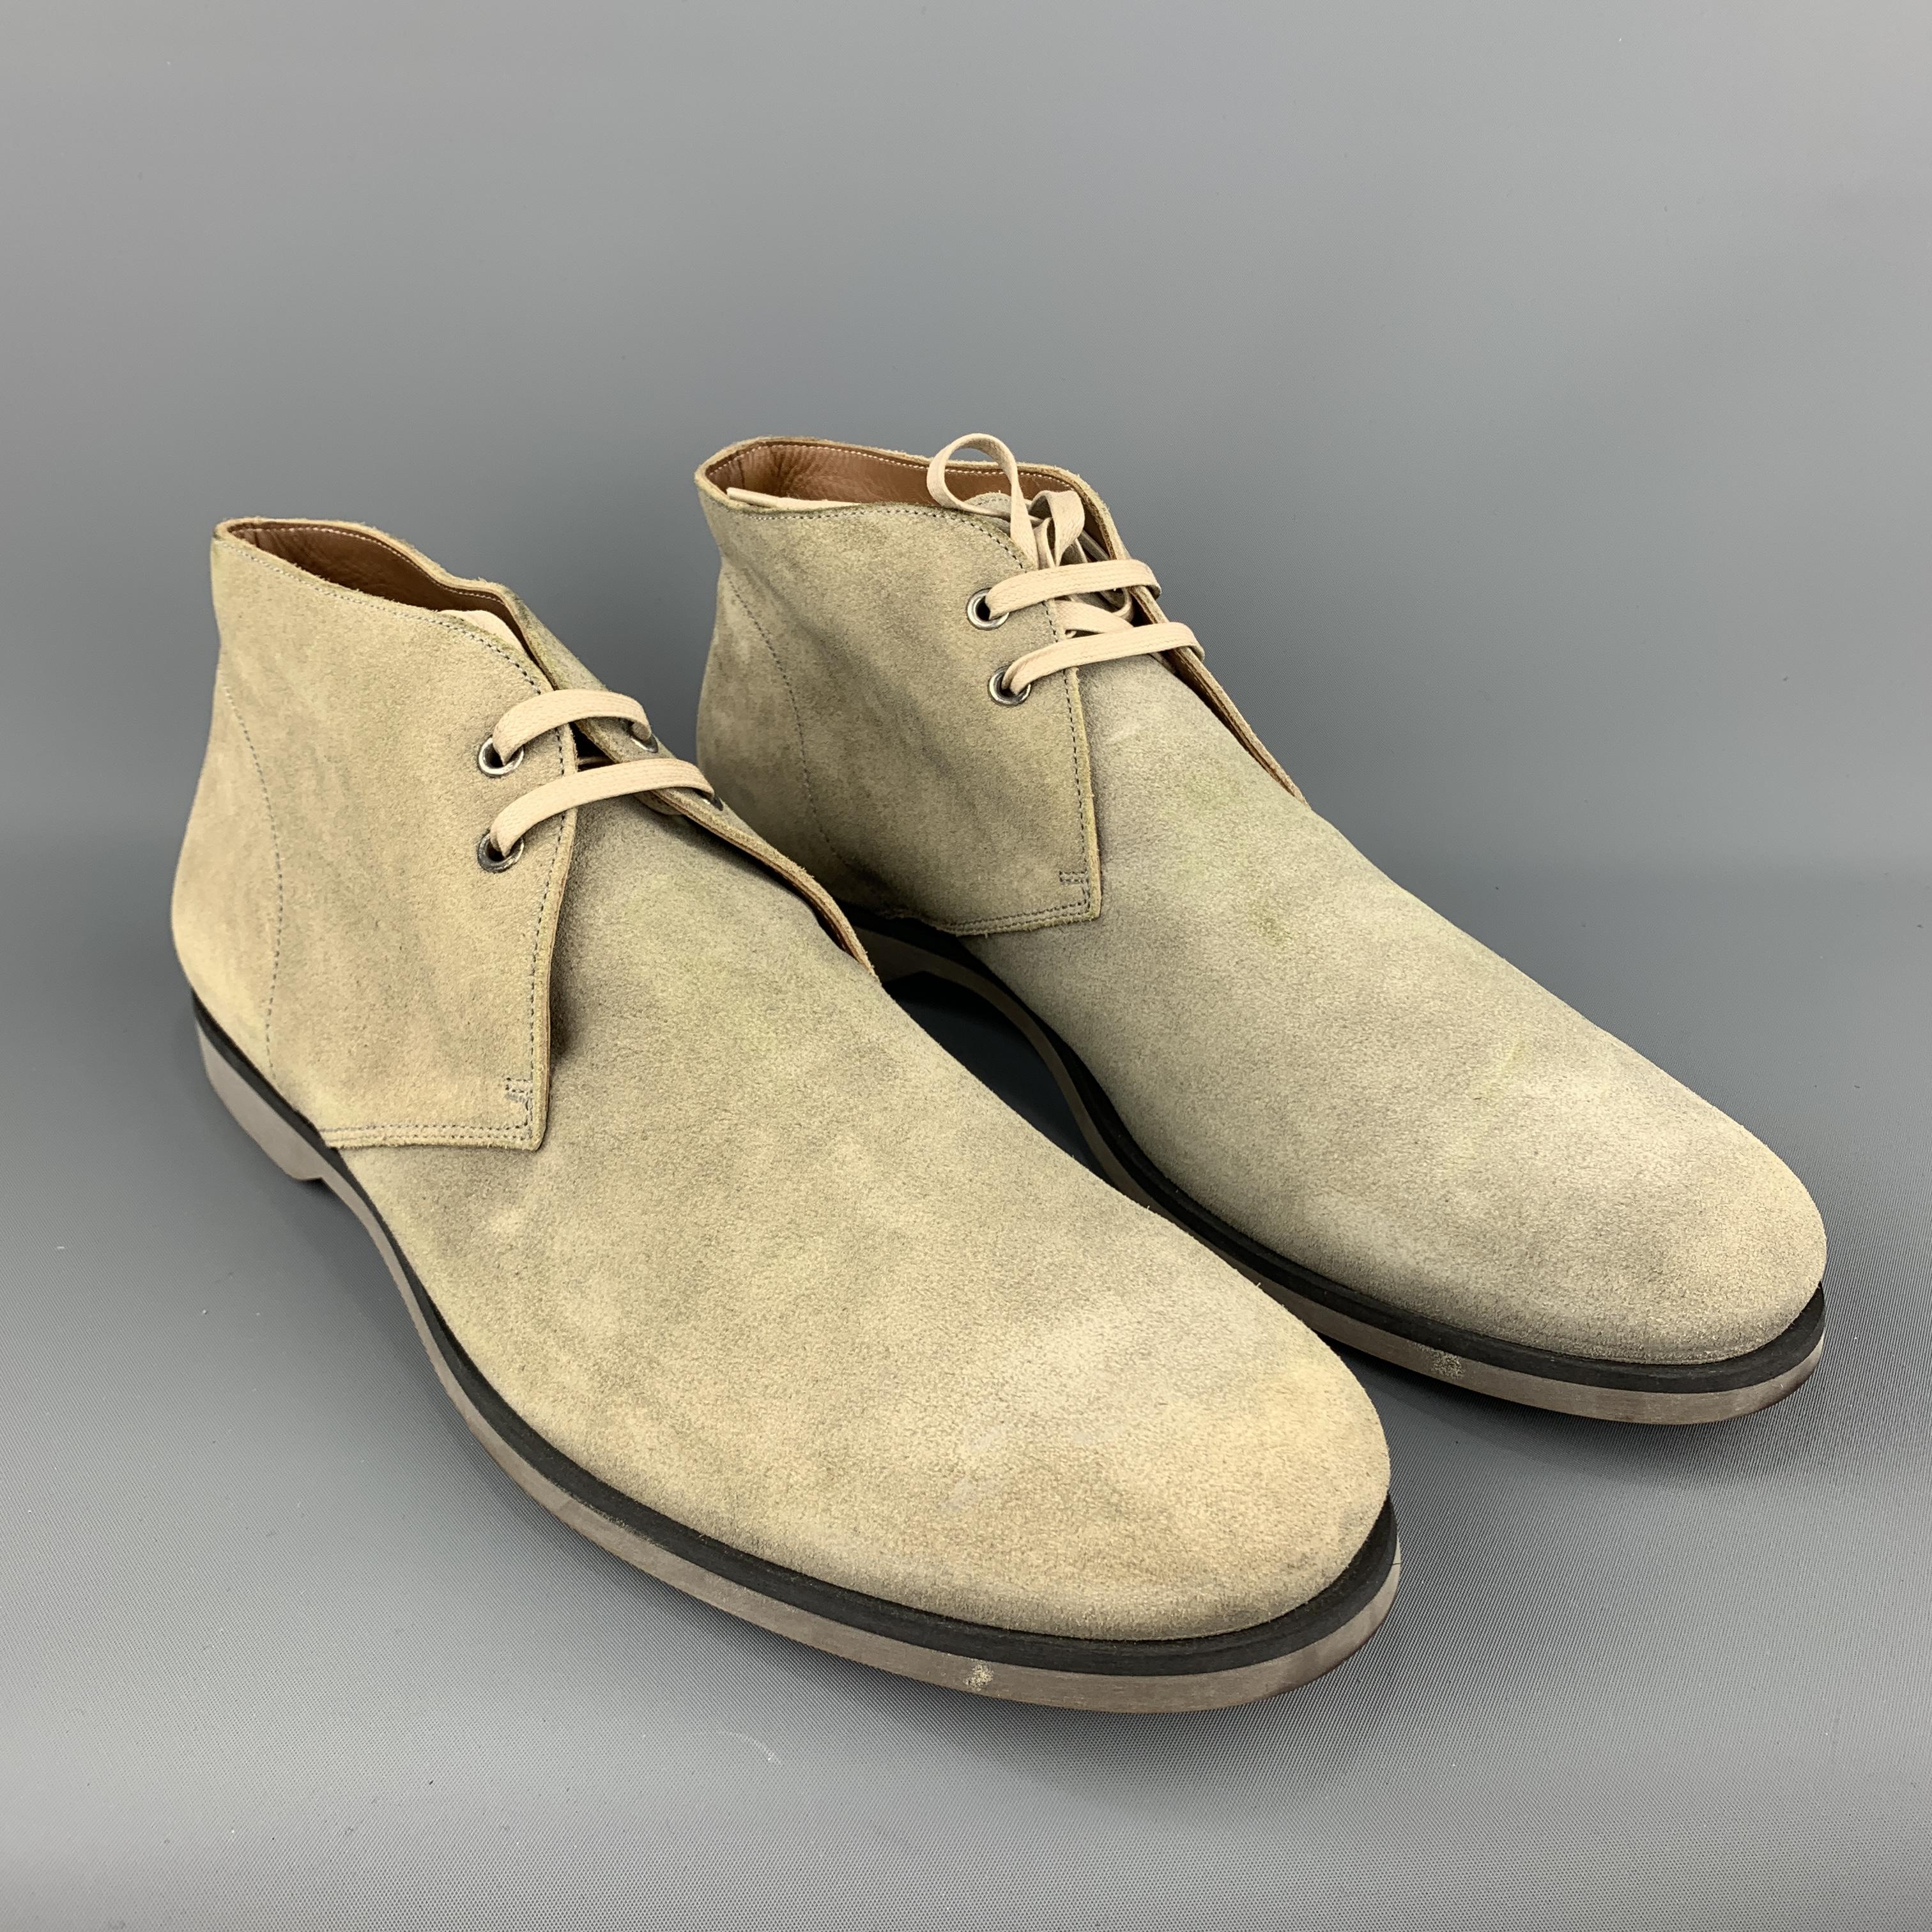 JOHN VARVATOS desert boots come in dirty wash effect beige suede with a rubber sole. With Box. Hand Made in Italy.
 
Excellent Pre-Owned Condition.
Marked: 12
 
Outsole: 12.5 x 4.25 in.